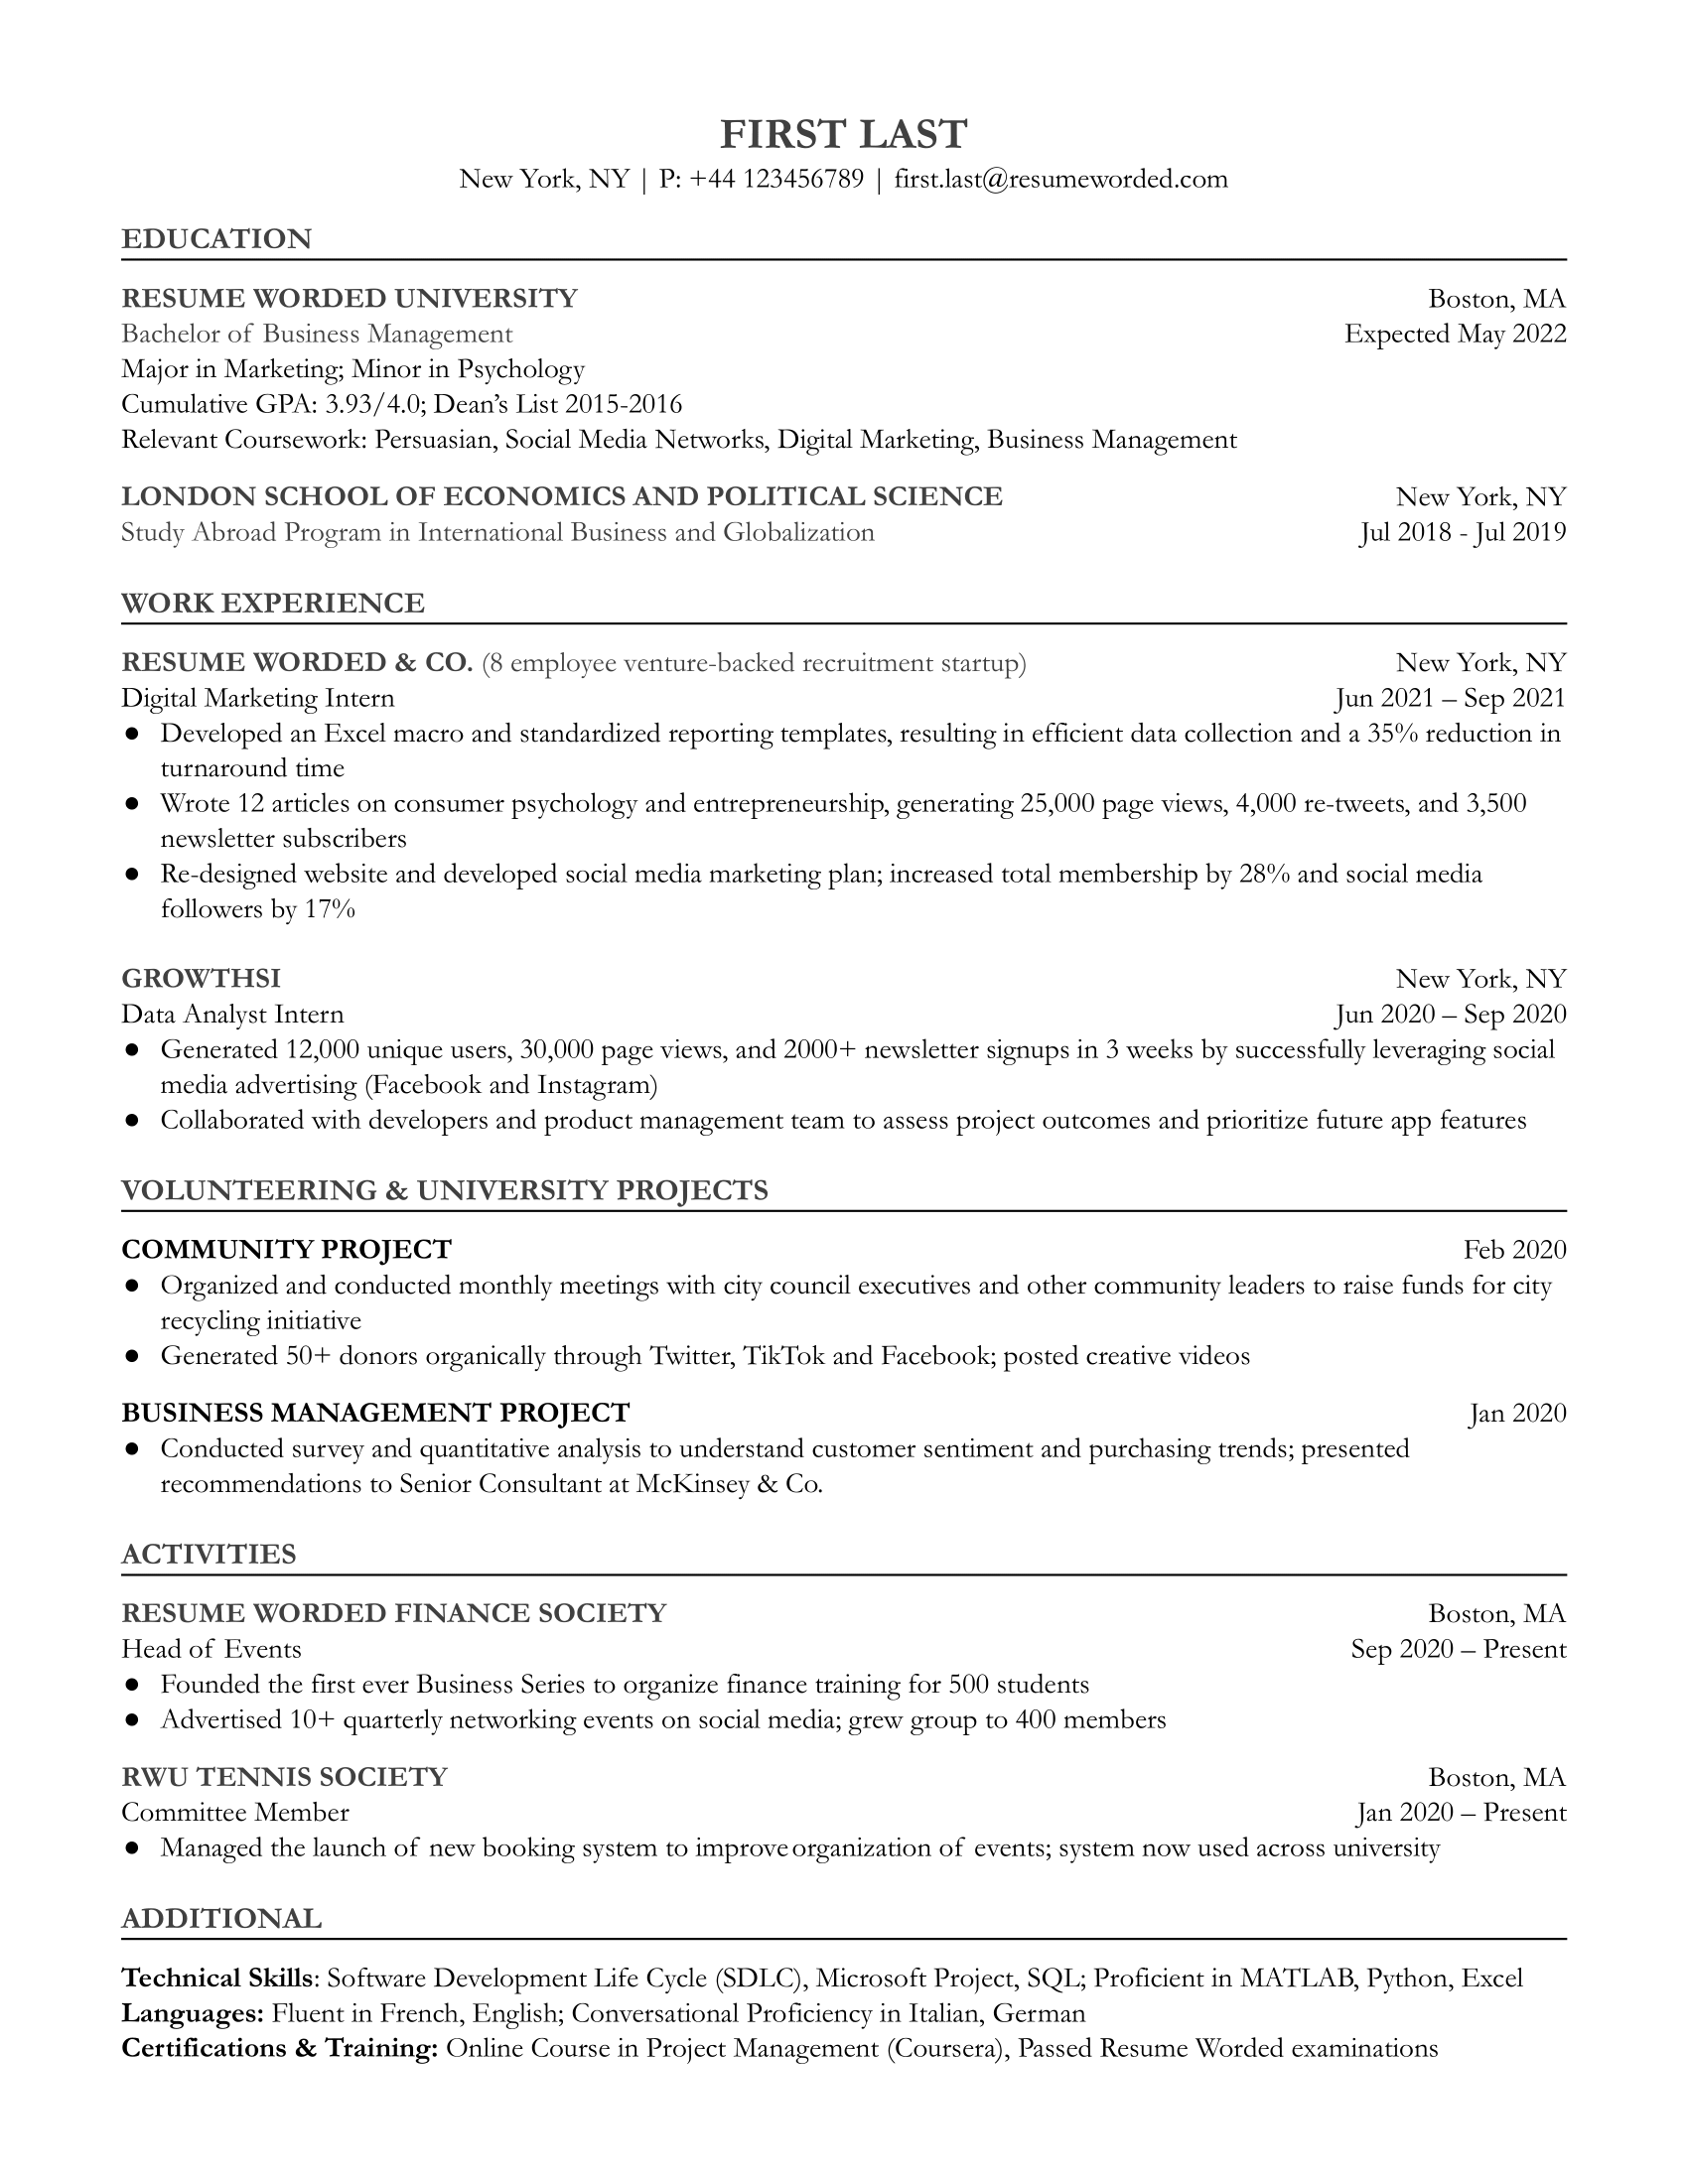 An entry level digital marketing resume template with relevant education, coursework, internships, university projects, extracurricular activities, skills, and certifications.